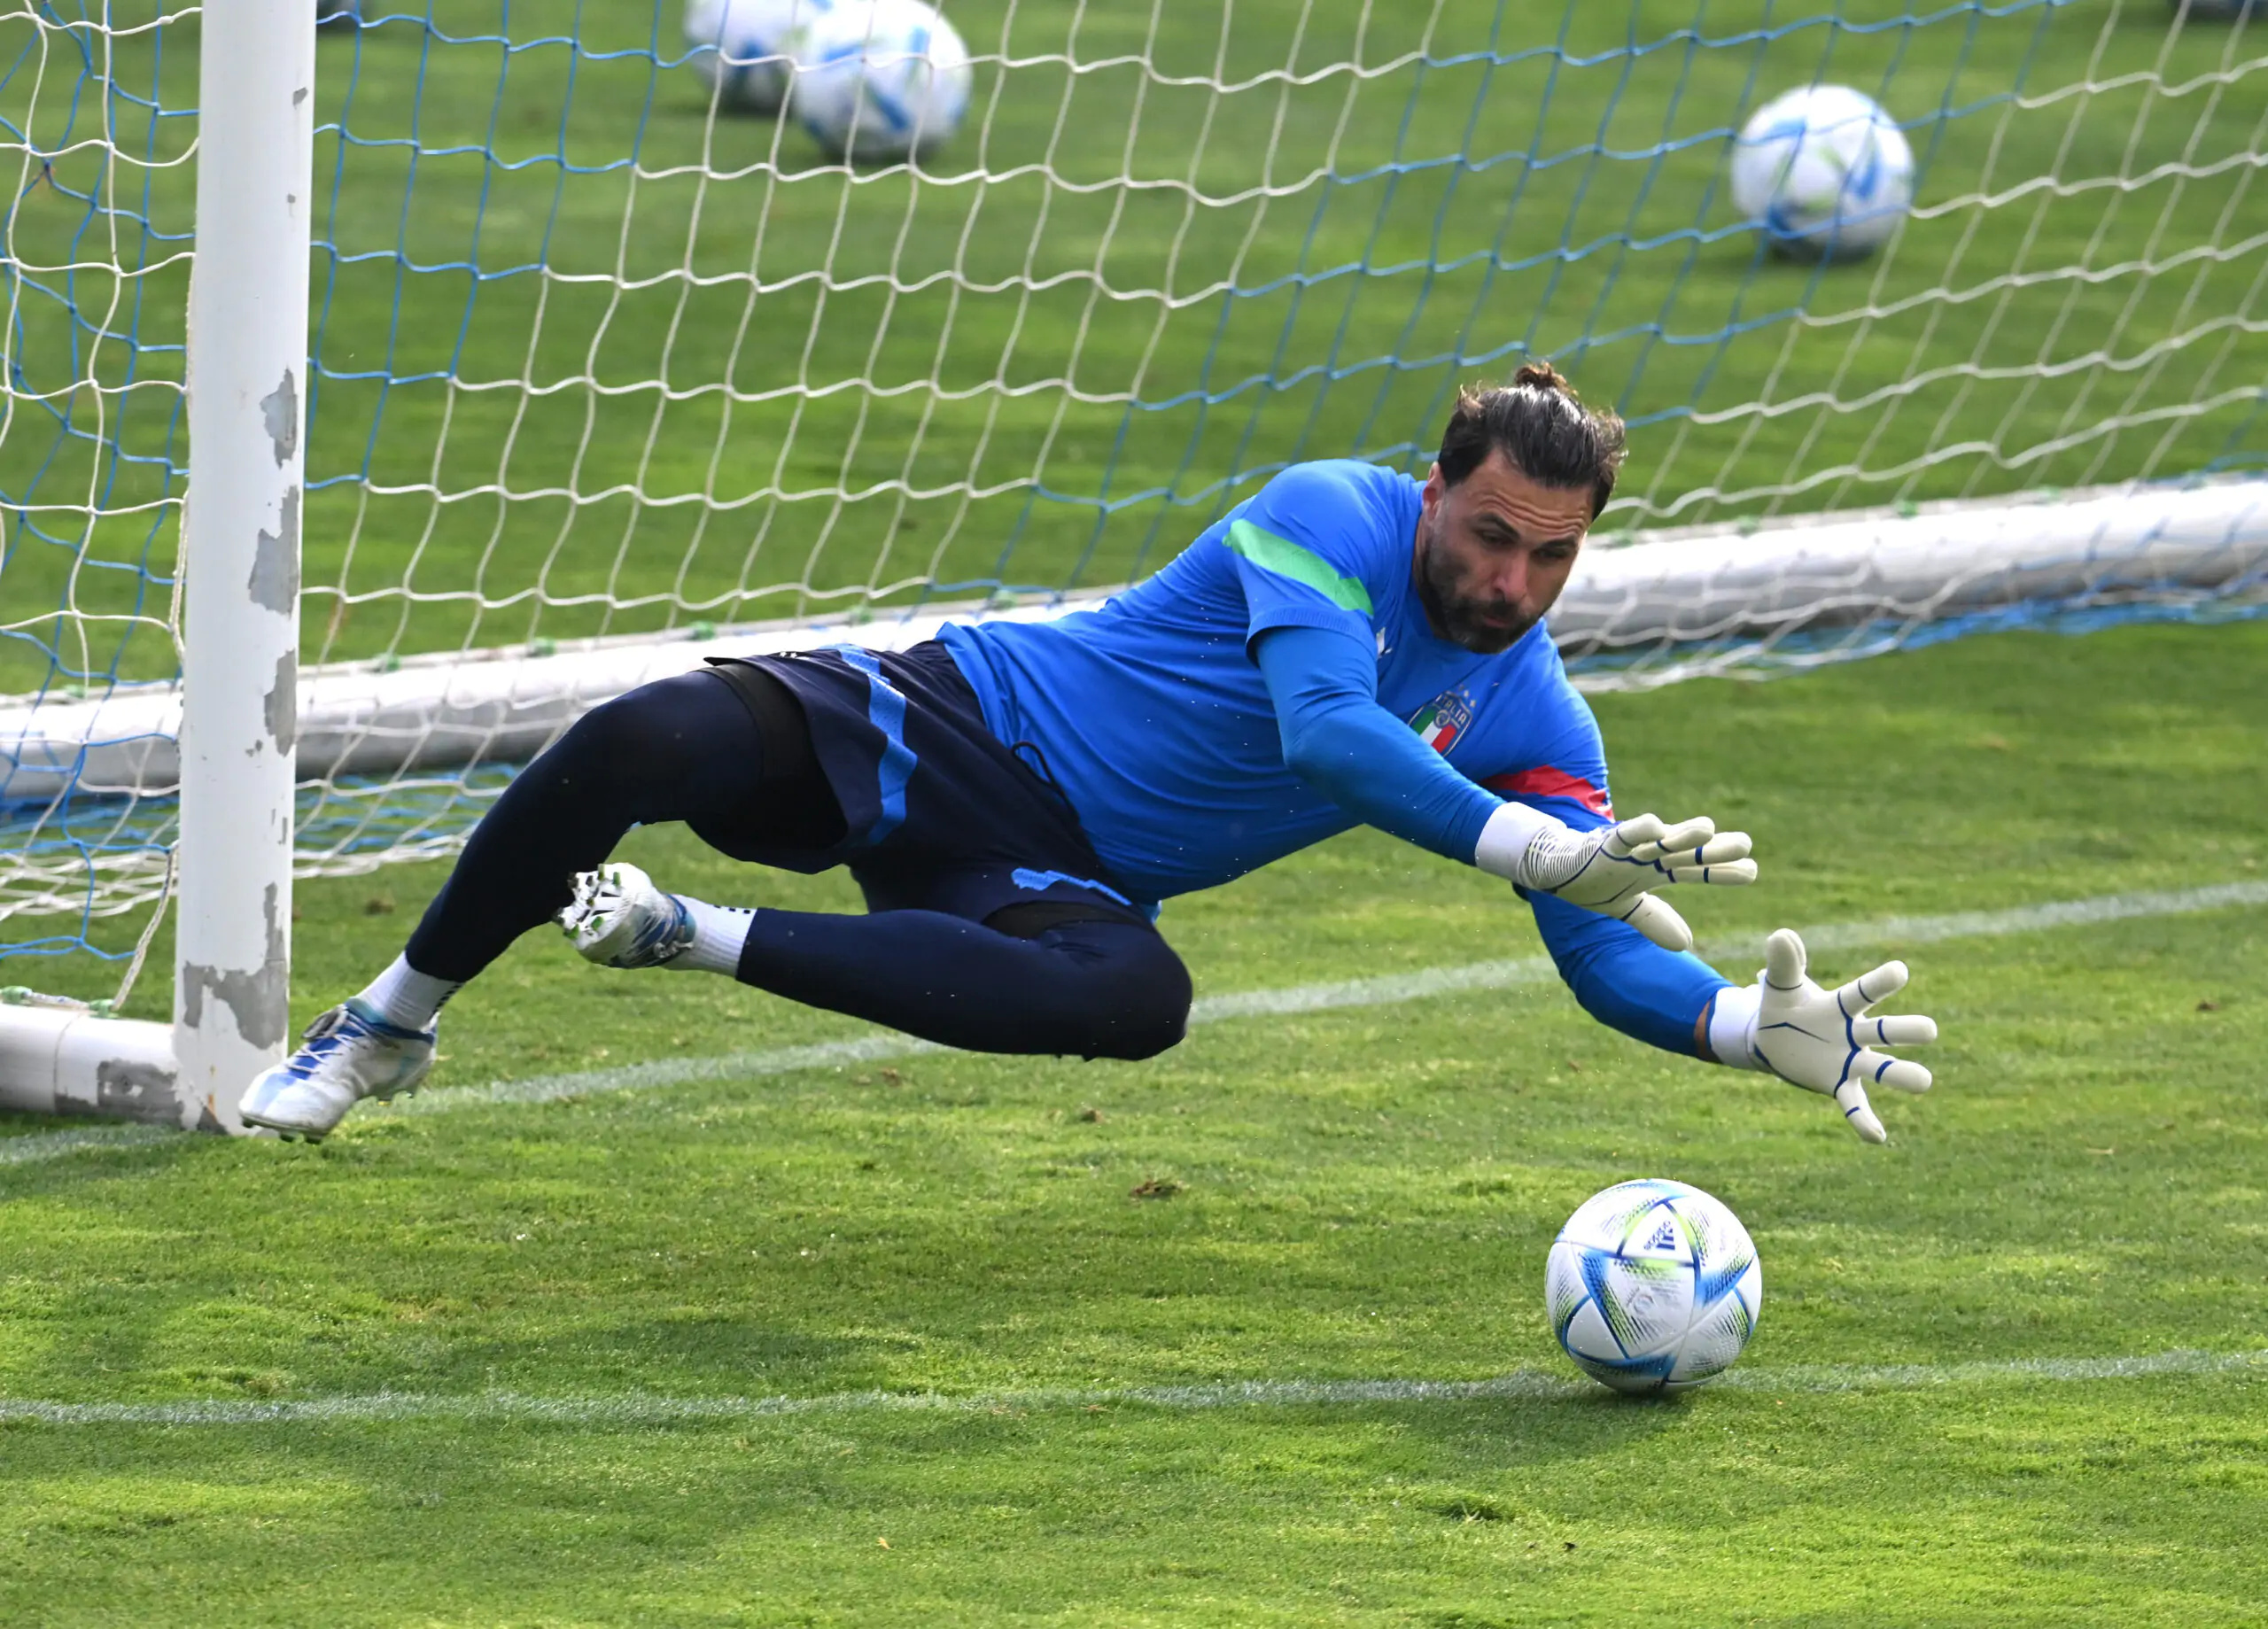 Fiorentina and Napoli completed the swap of backup goalies, with Salvatore Sirigu joining the Viola and the Partenopei adding Pierluigi Gollini.